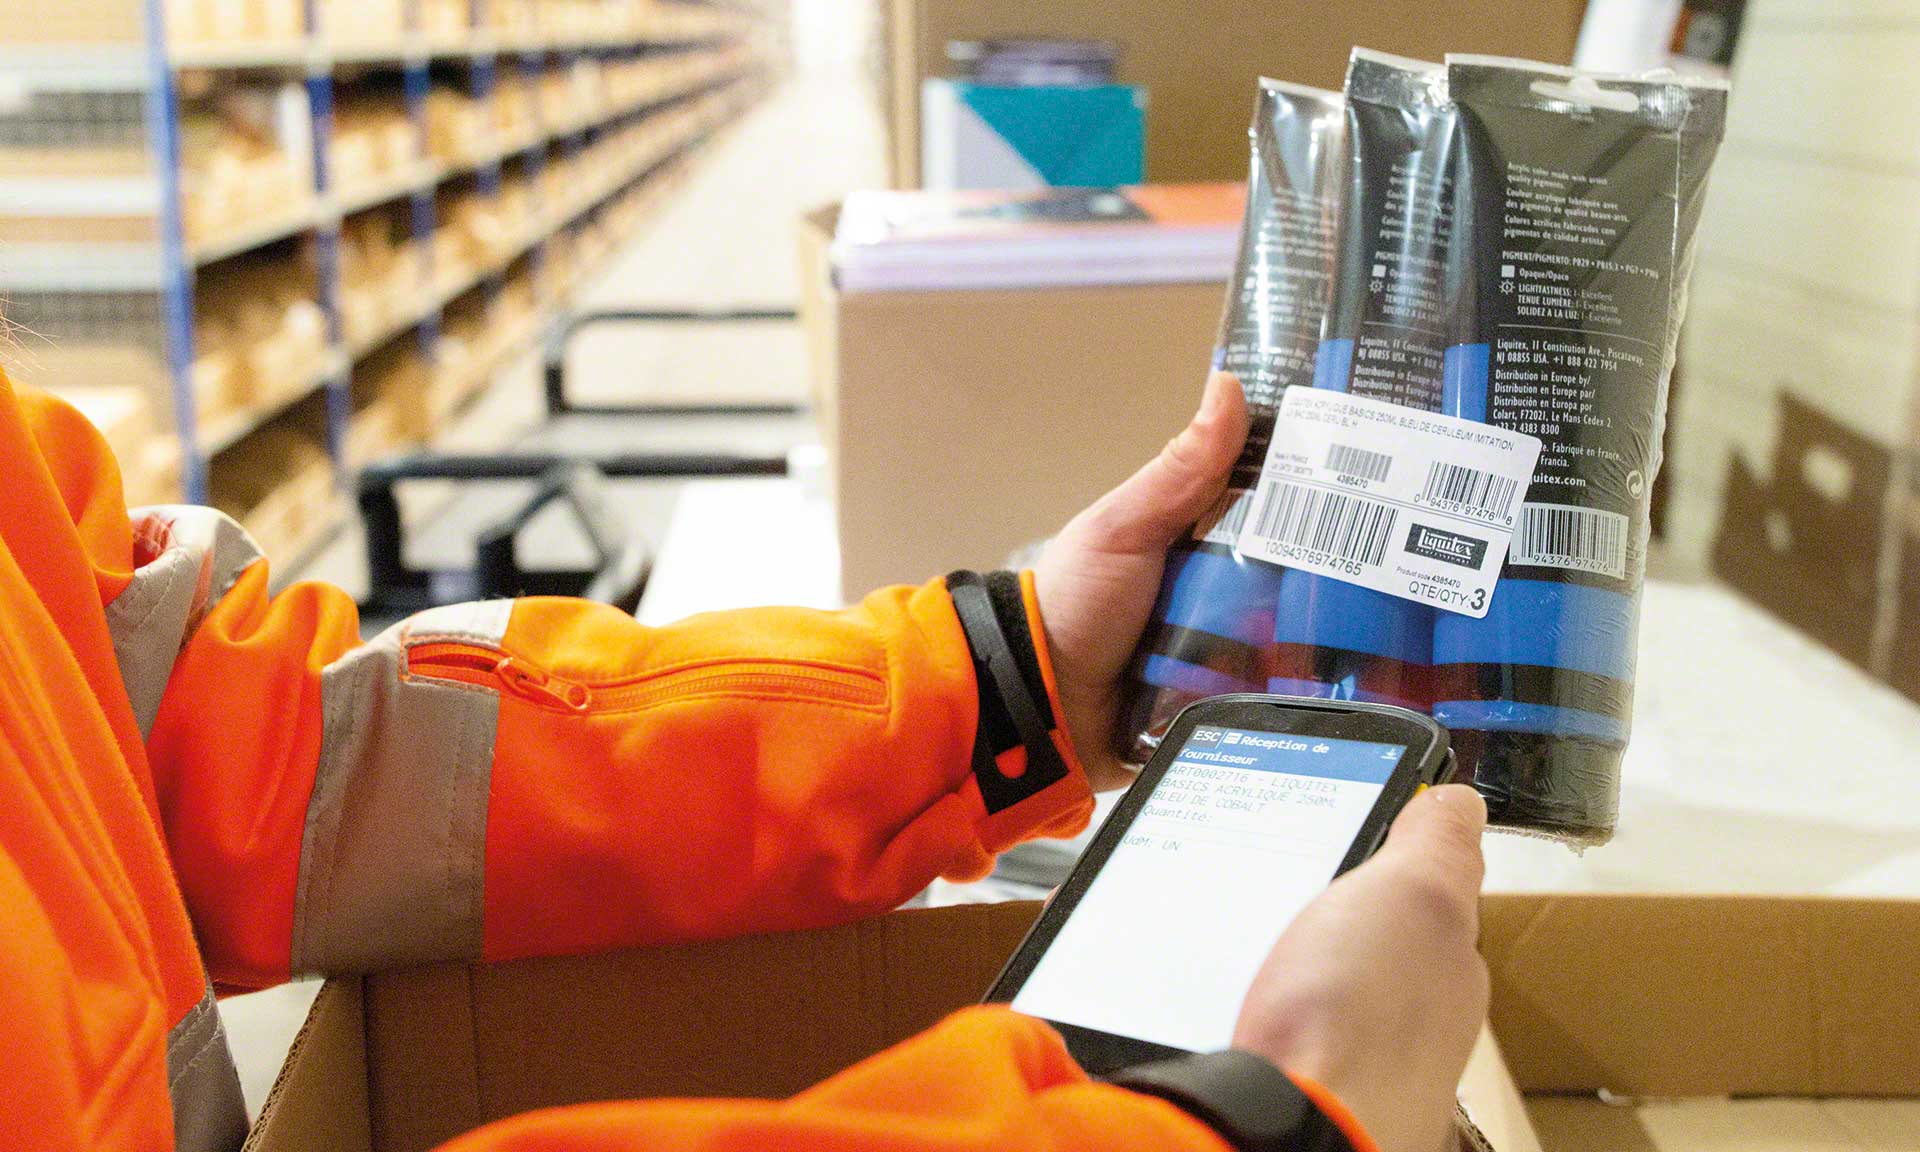 Stationary company SurDiscount has digitalised its processes to reduce shipping errors